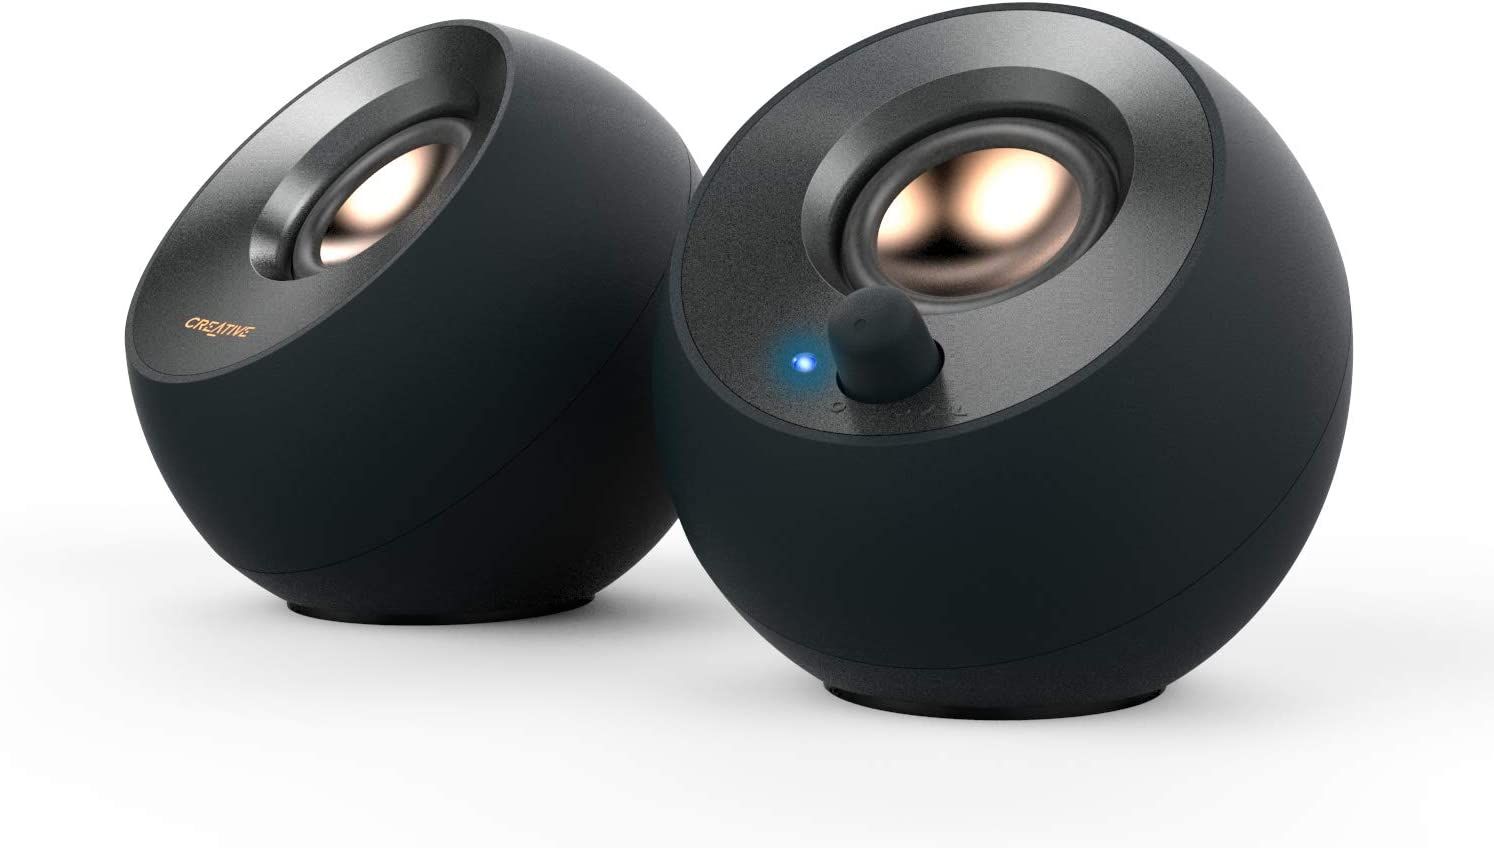 two creative pebble v2 speakers side by side